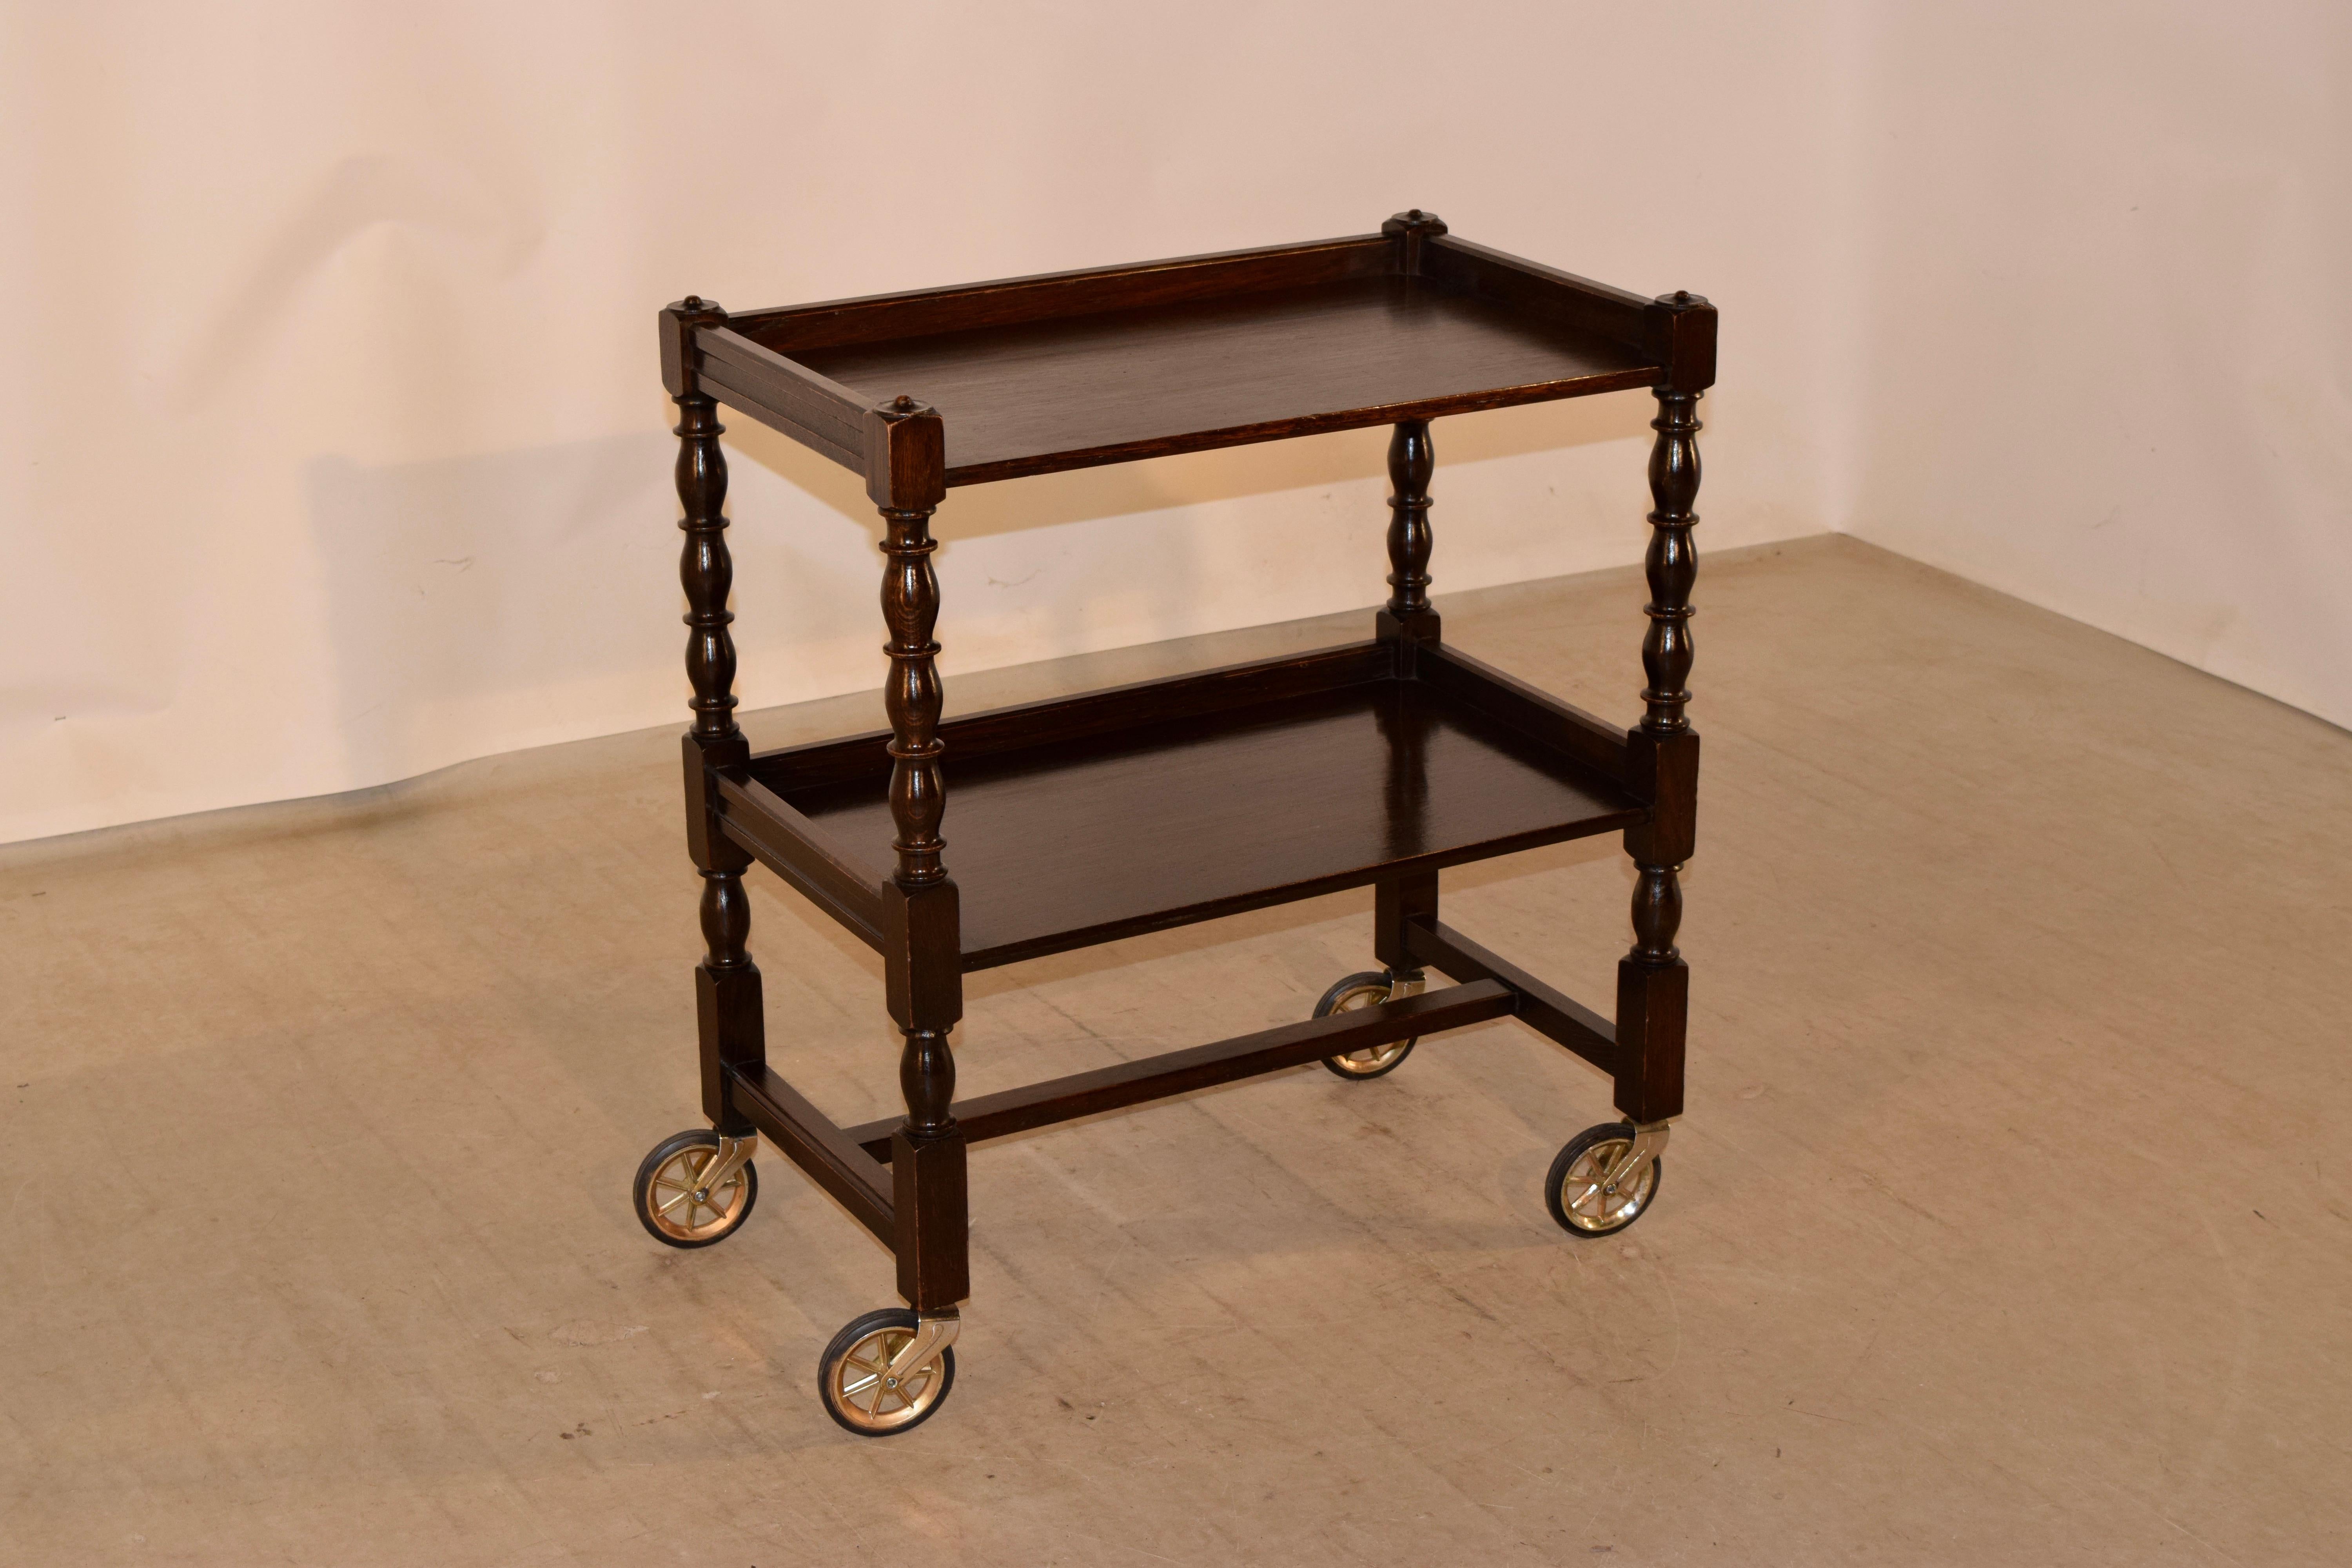 Circa 1910 English oak drinks cart with two shelves, both with galleries surrounding them and separated by hand turned bob and stop shelf supports. The legs are also hand turned and are joined by simple stretchers and supported on oversized wheels